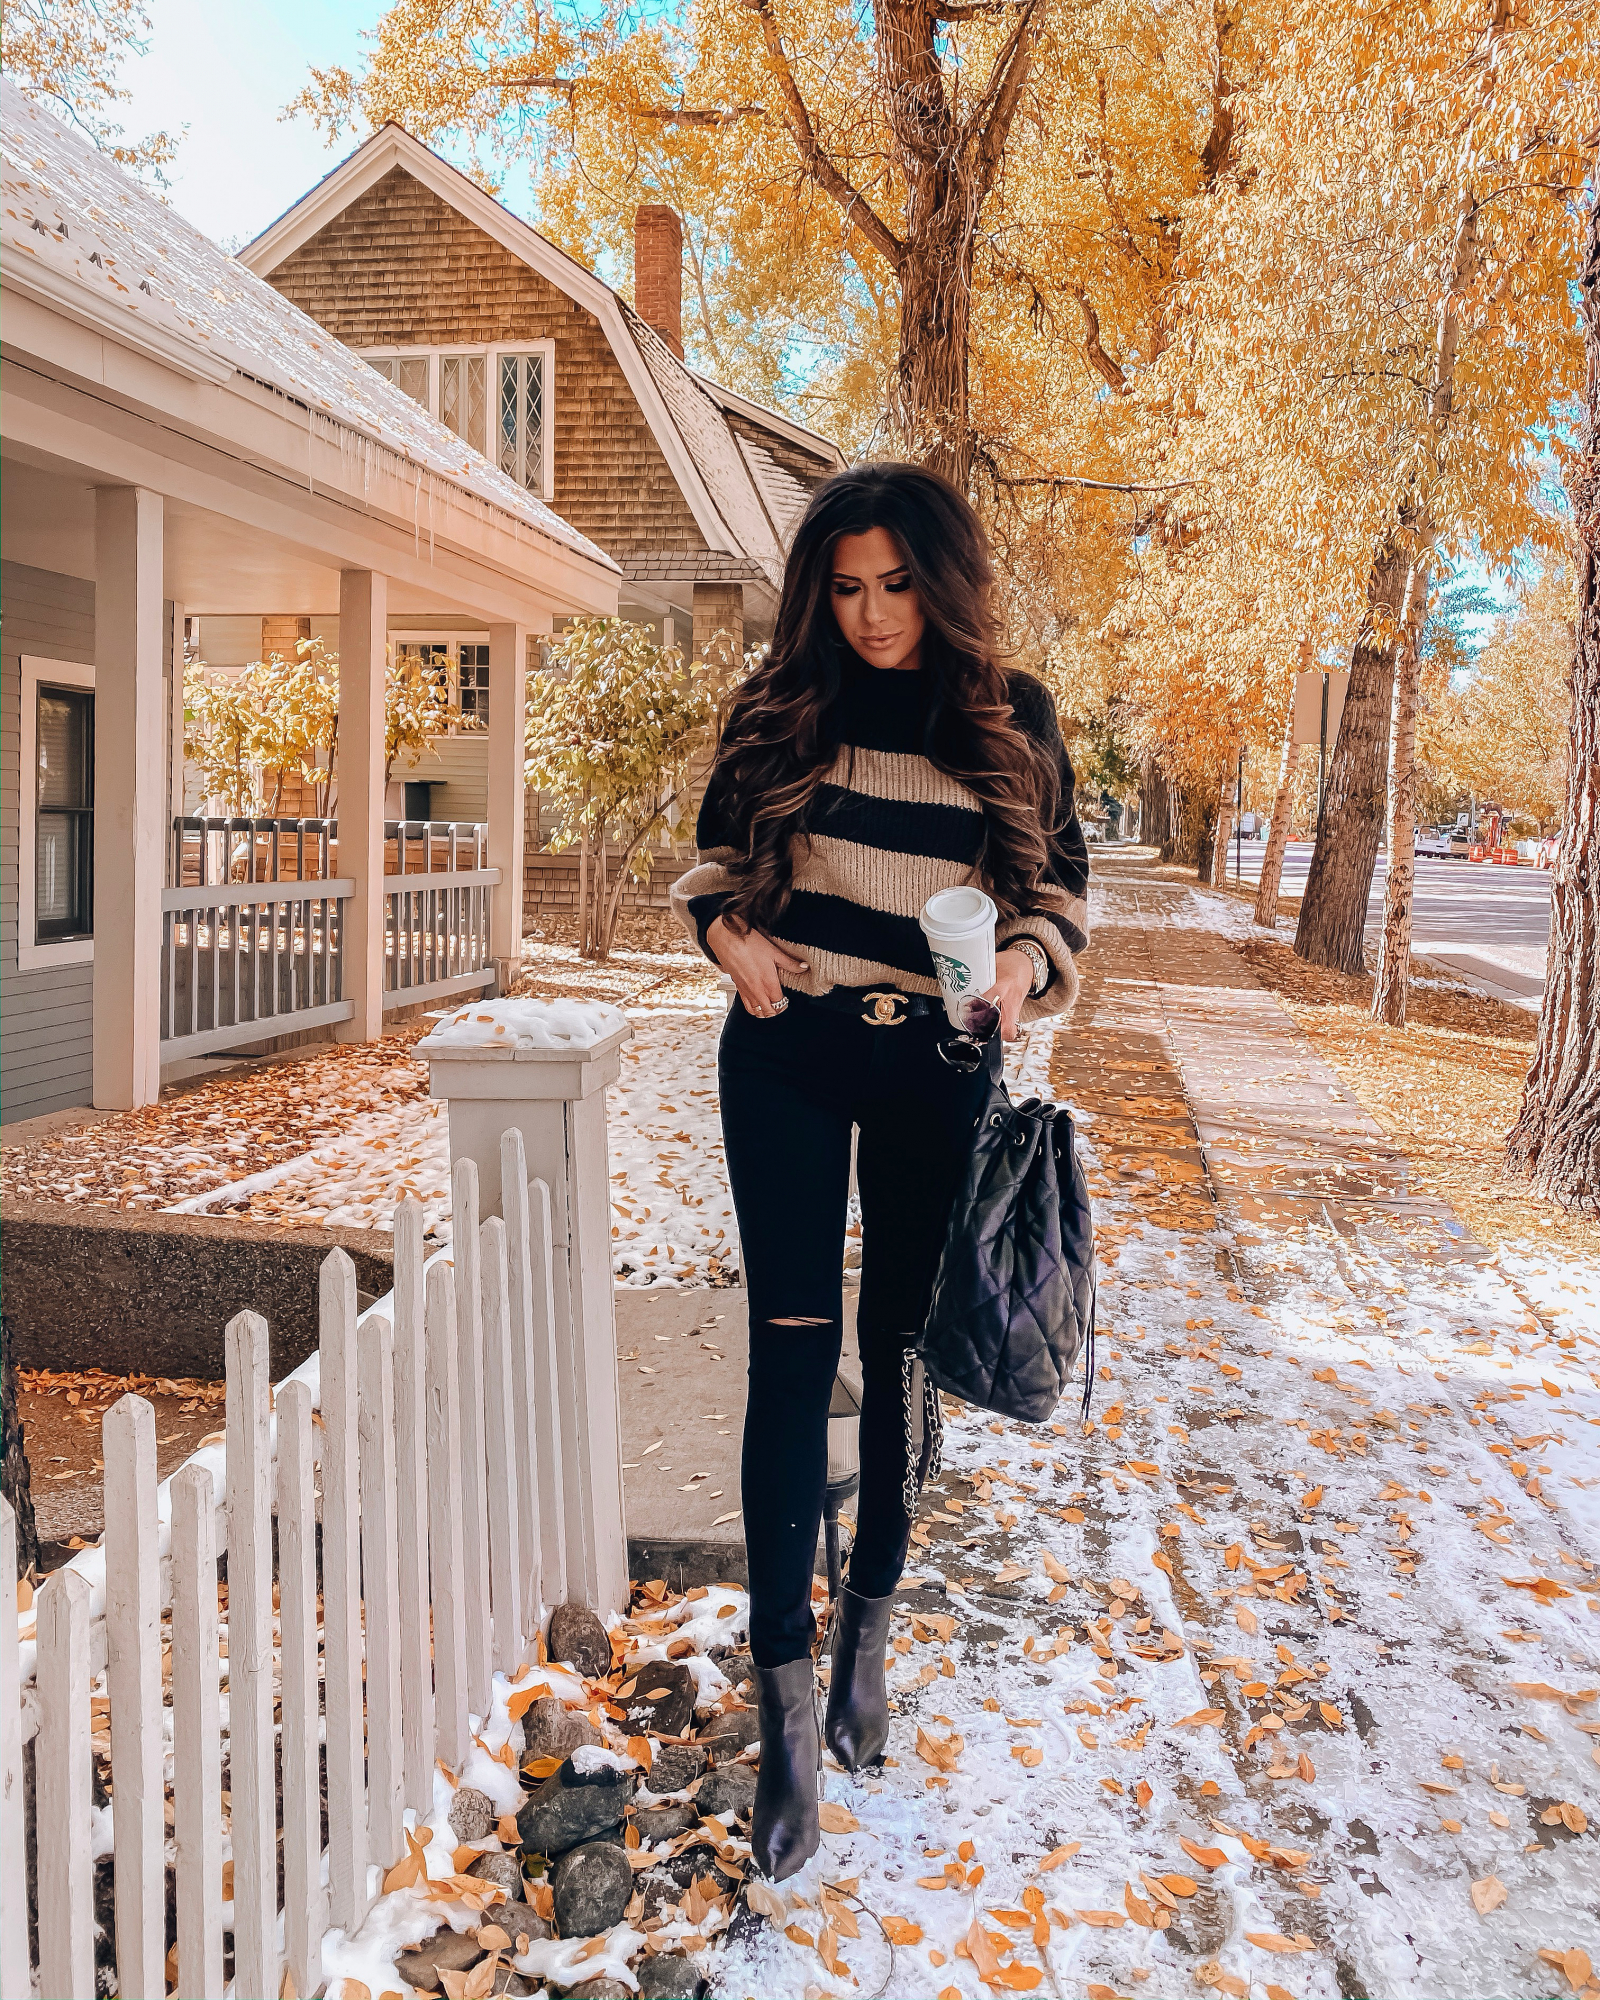 fall fashion pinterest 2019, emily gemma, aspen fall 2019 | A YEAR IN REVIEW : MASSIVE 2019 INSTAGRAM RECAP by popular Oklahoma life and style blog, The Sweetest Thing: image of a woman walking outside and wearing a Nordstrom Linetta Balloon Sleeve Sweater ONLY, Nordstrom Madewell jeans, Nordstrom Mella Bootie MARC FISHER LTD, Nordstrom Large Chunky Hoop Earrings ARGENTO VIVO, Nordstrom High Key Mini 59mm Rimless Aviator Sunglasses QUAY AUSTRALIA, Nordstrom Lip Cheat Lip Liner CHARLOTTE TILBURY, Nordstrom Hot Lips Lipstick CHARLOTTE TILBURY, and Nordstrom Gloss Luxe Moisturizing Lipgloss TOM FORD. 